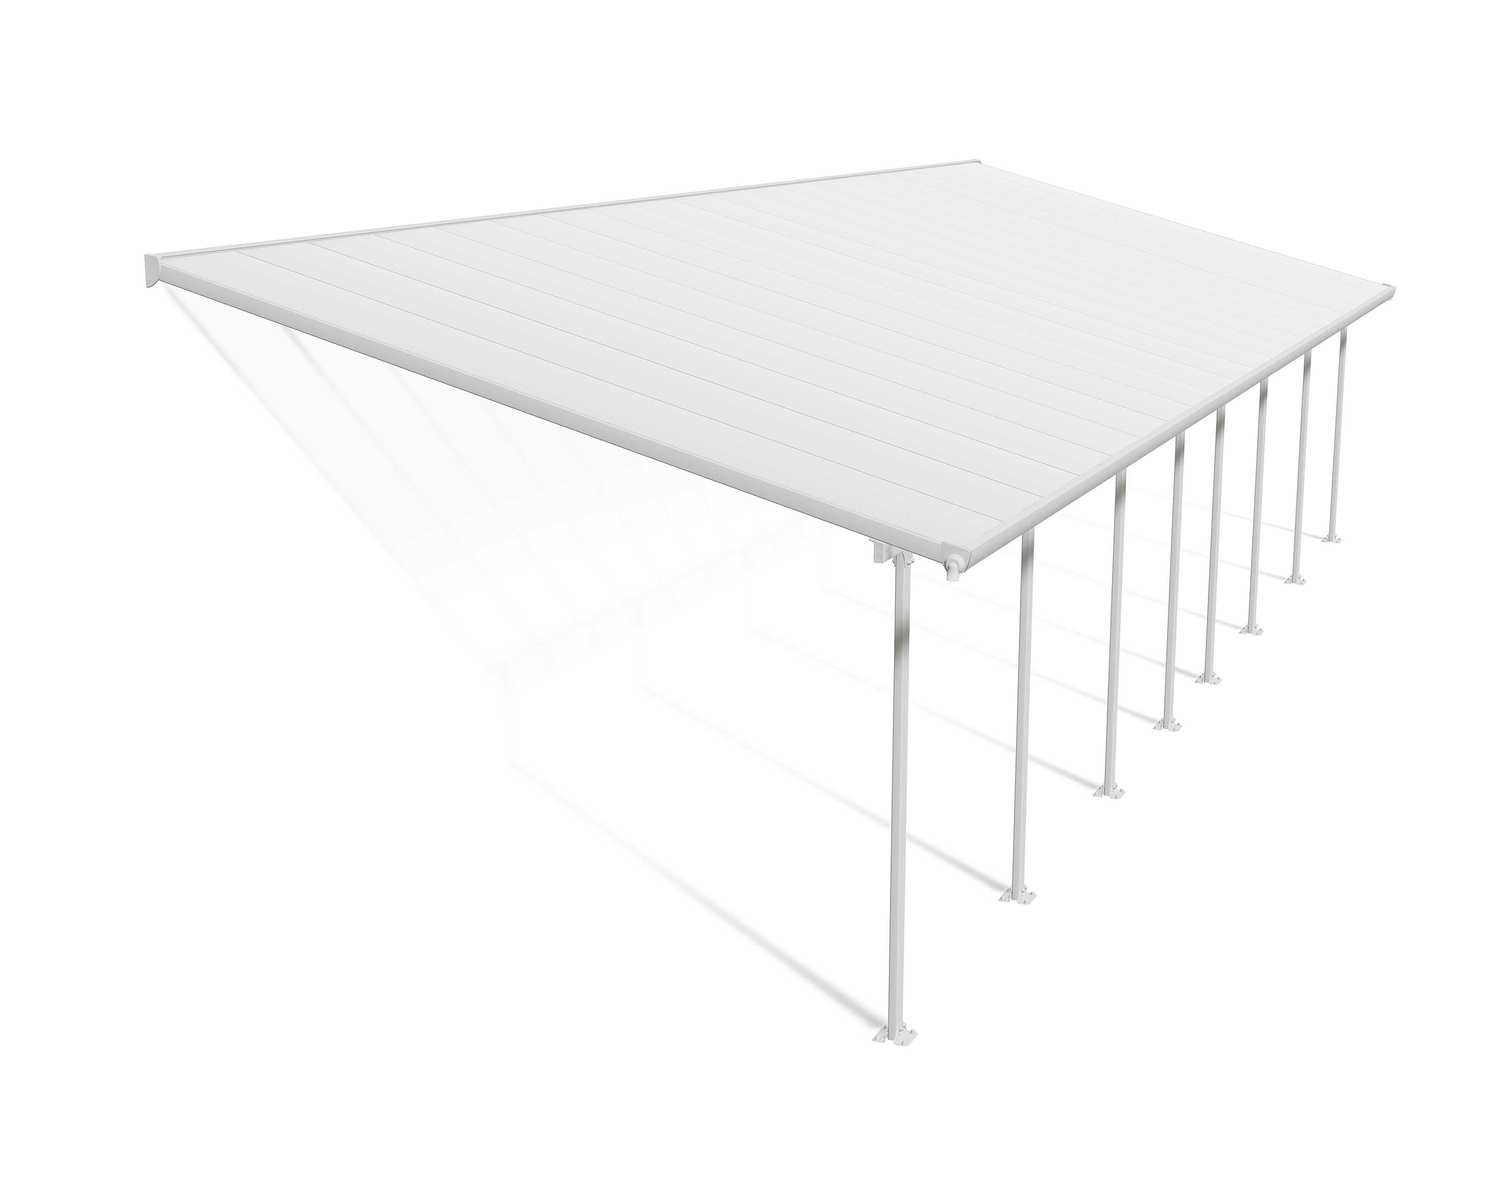 Patio Cover Kit Feria 4 ft. x 12.12 ft. White Structure & White Multi Wall Glazing